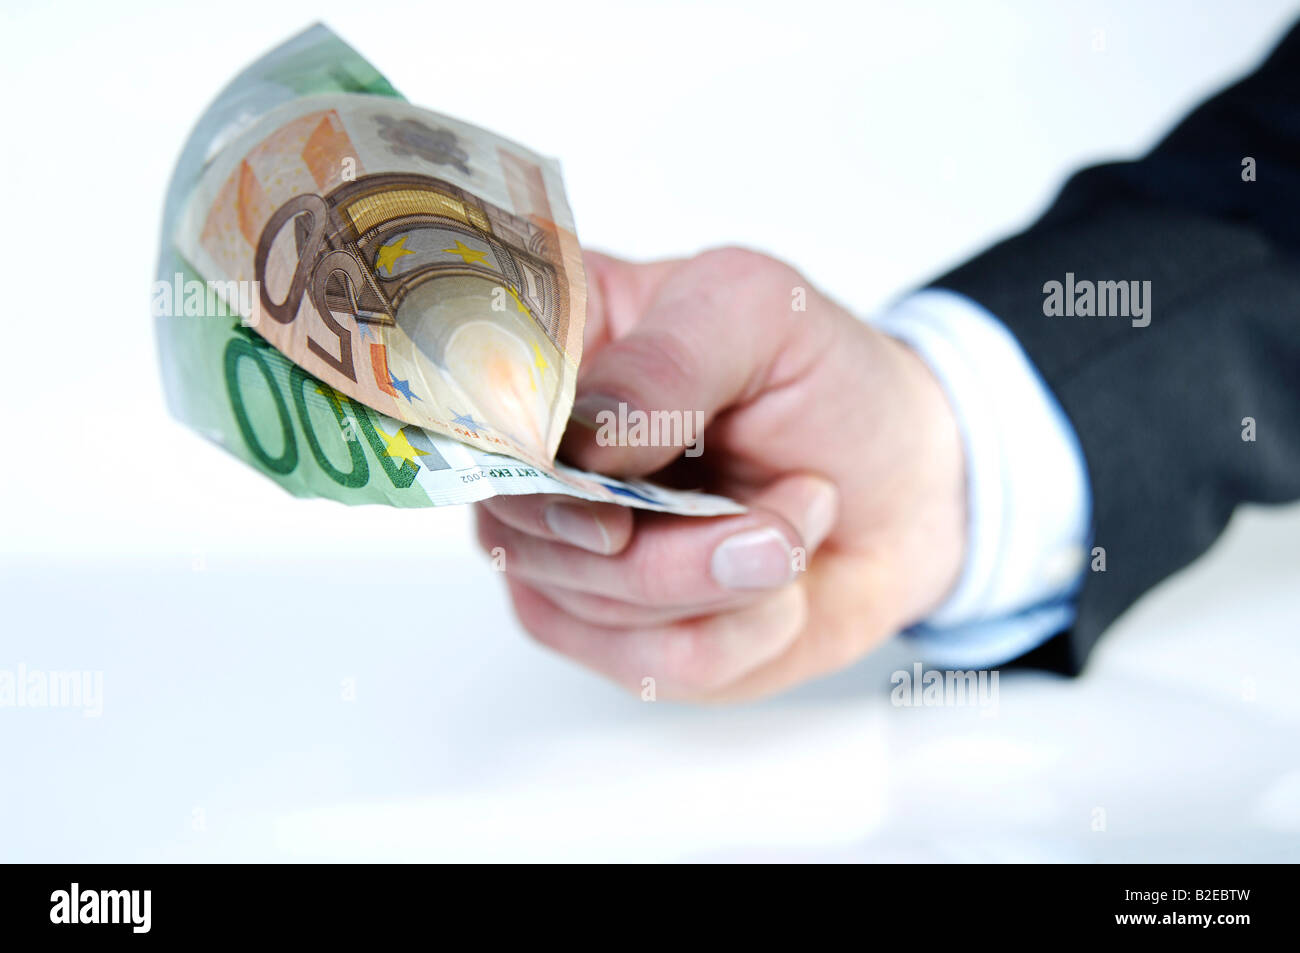 Close-up of person's hand offering European Union Euro notes Stock Photo